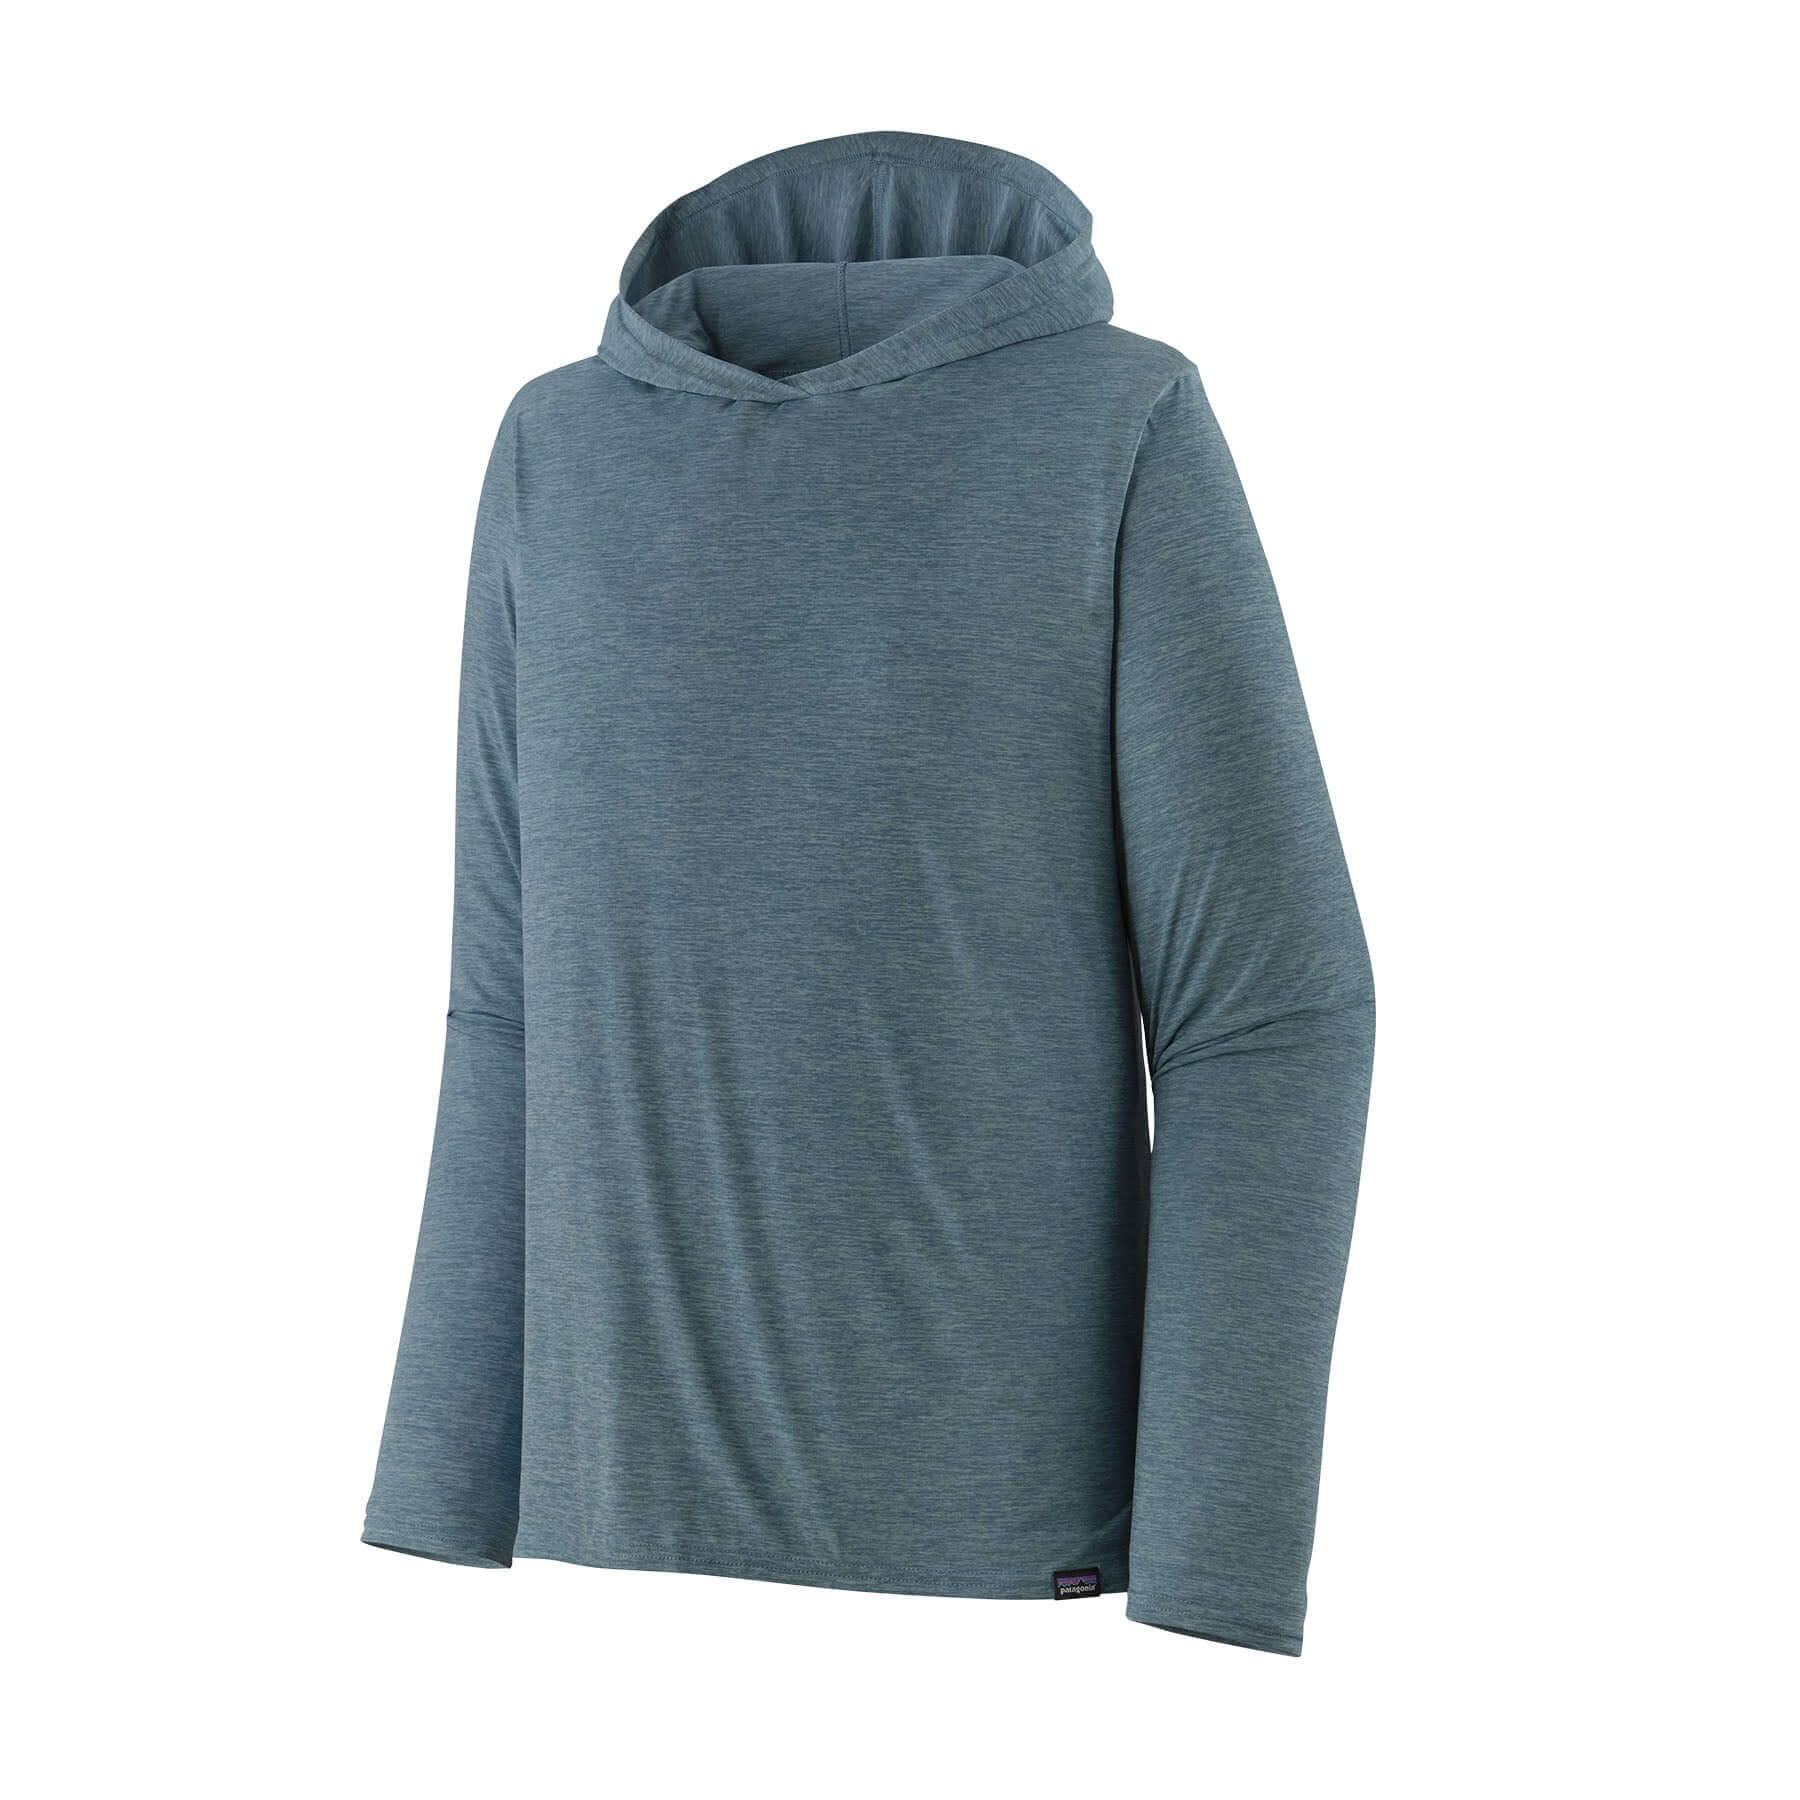 Men's Capilene® Cool Daily Hoody in Utility Blue - Light Utility Blue X - Dye | Patagonia Bend